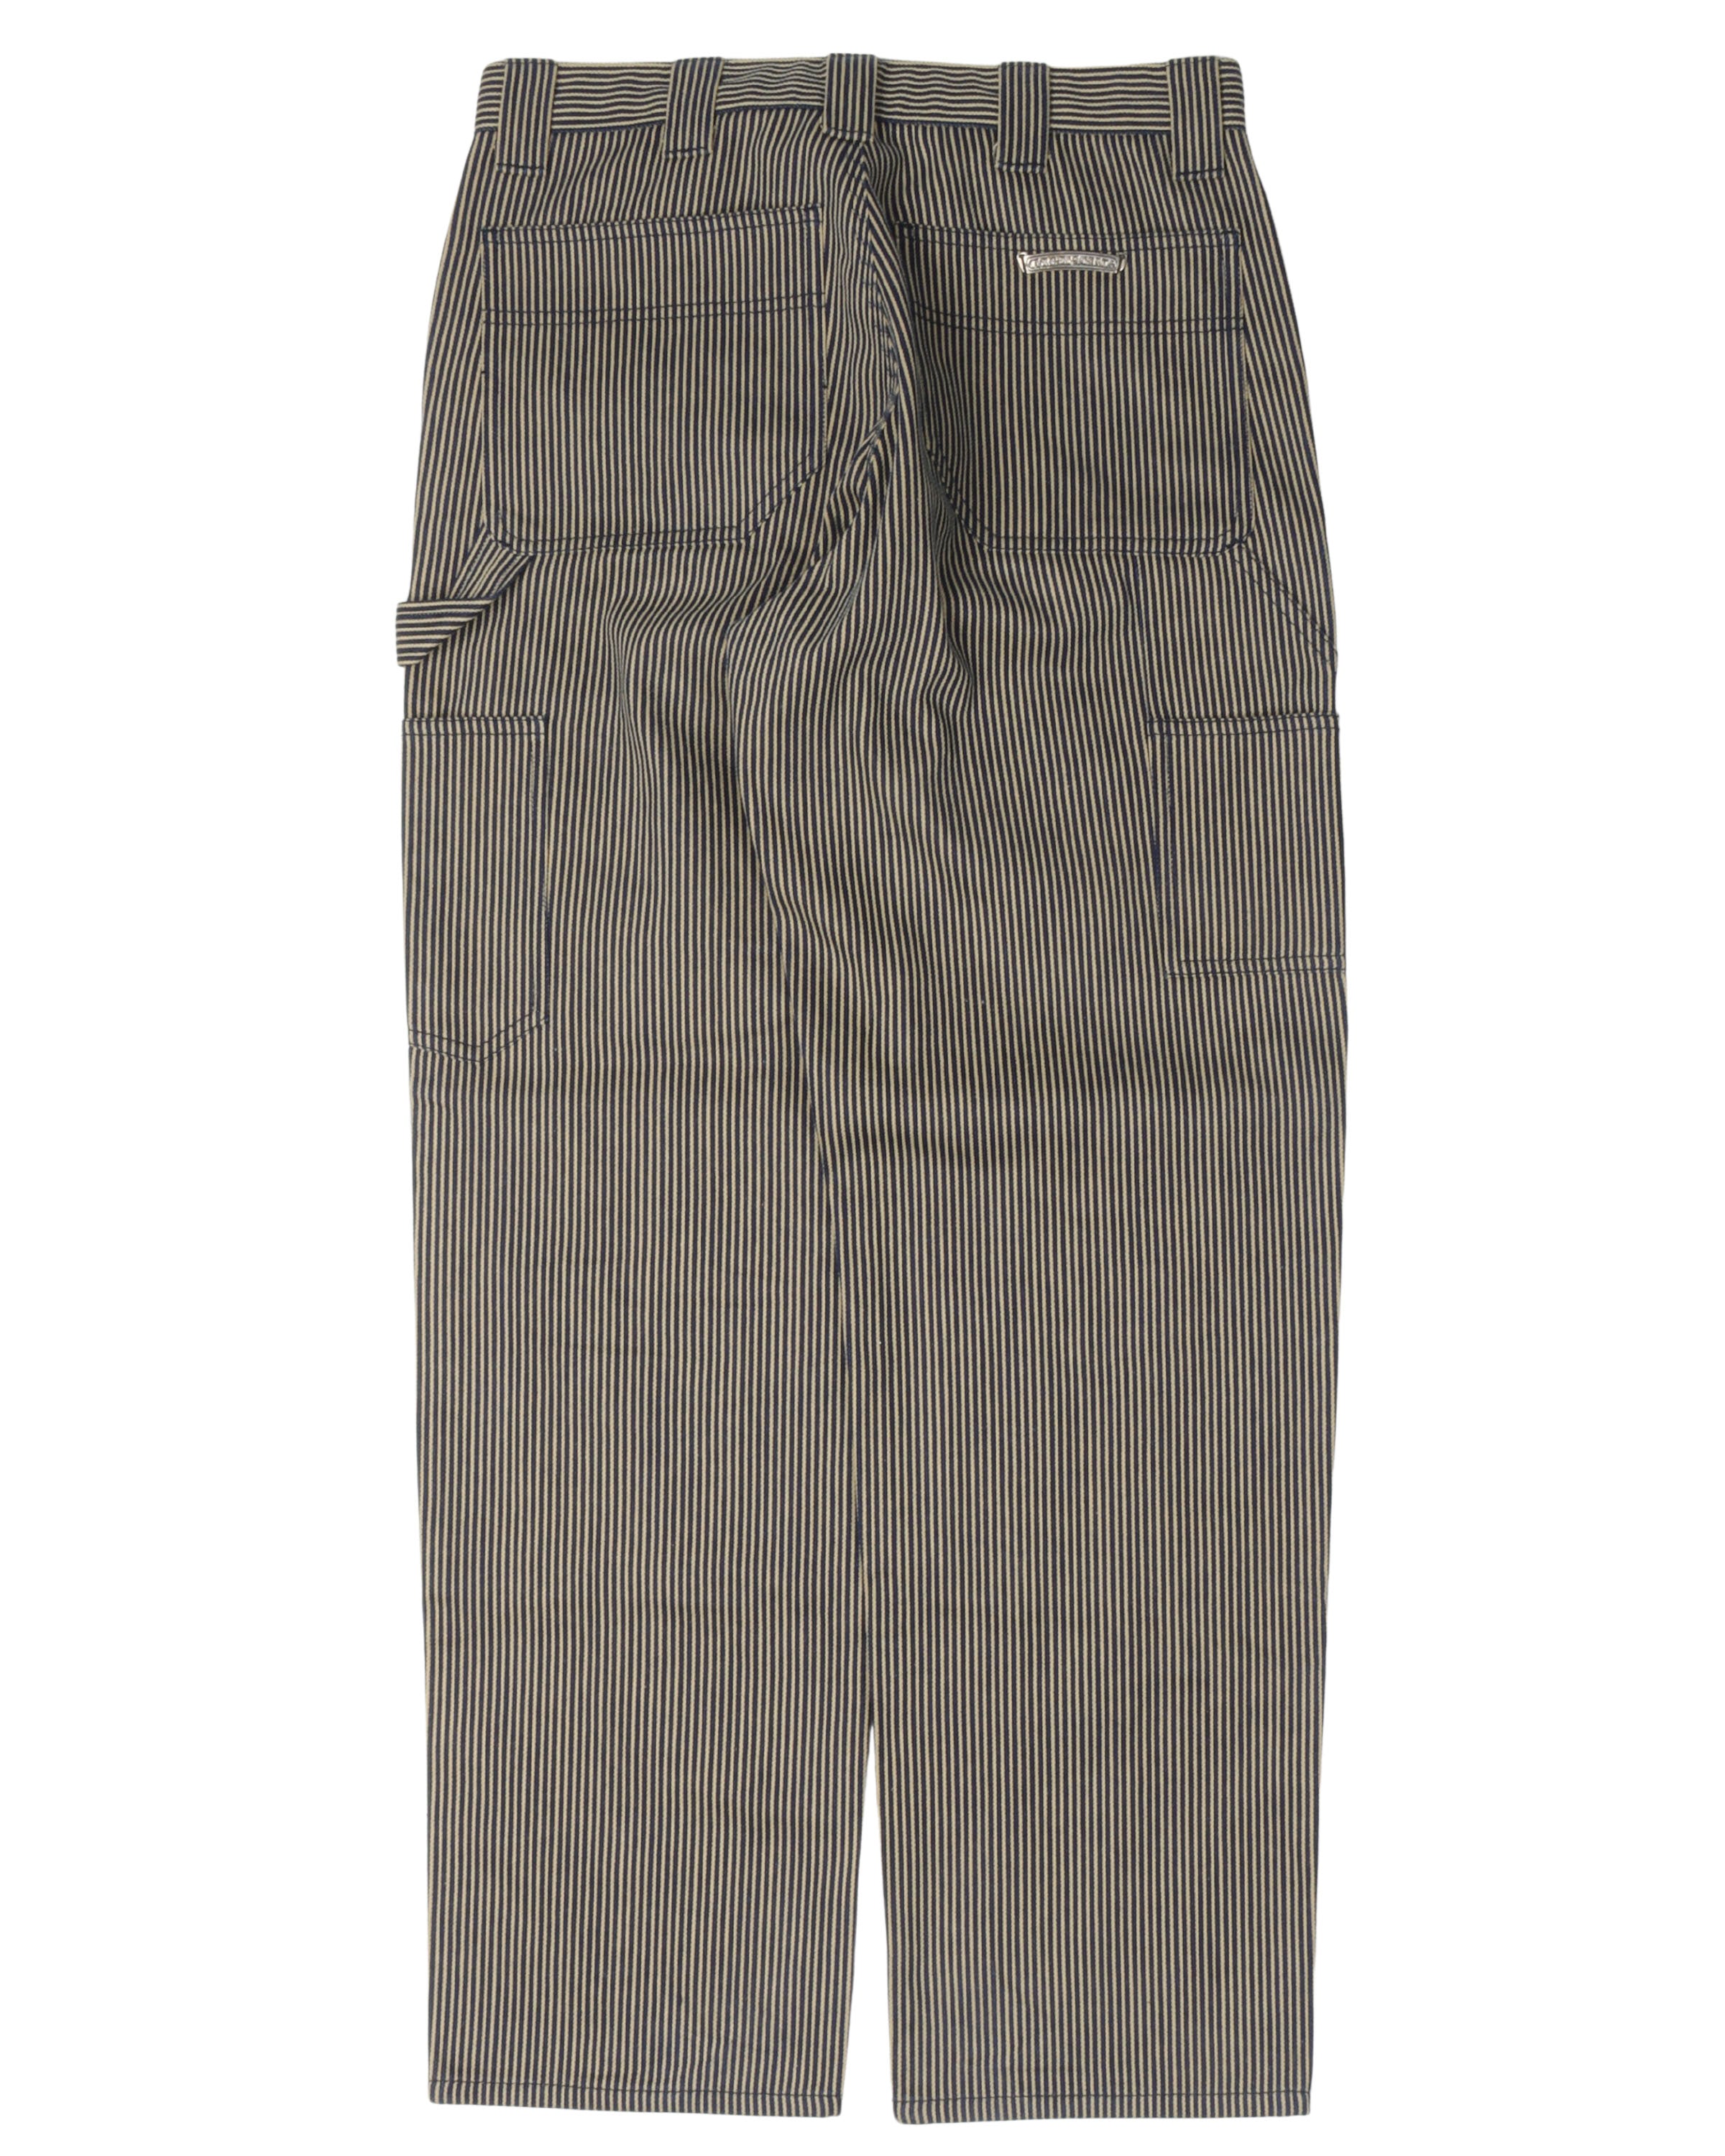 Hickory Striped Double Knee Work Pants